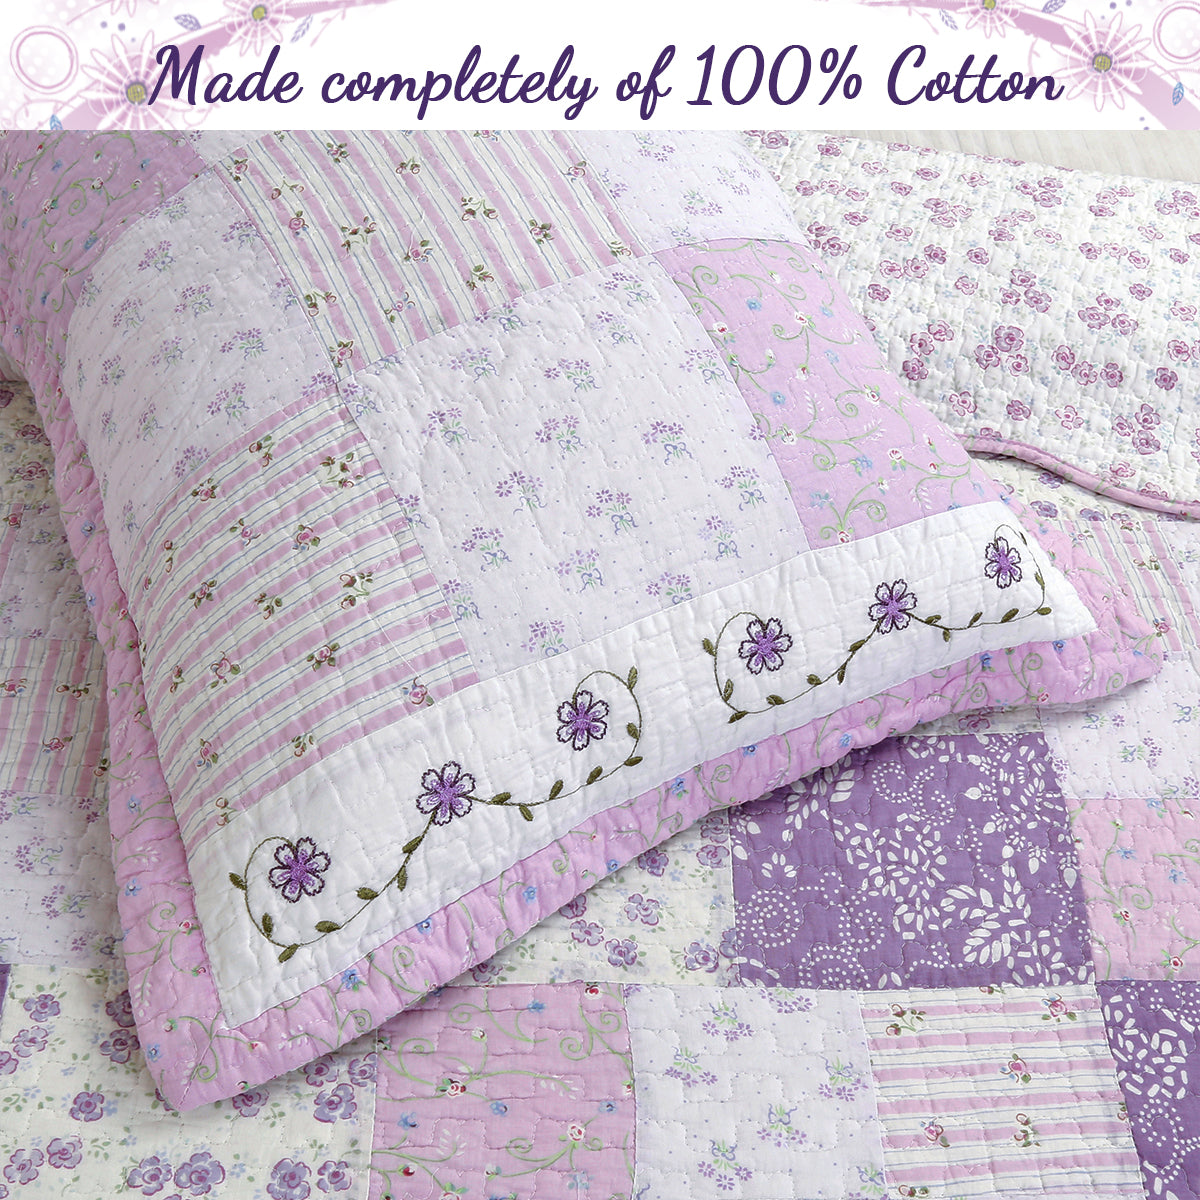 Love and Quilts, Online Shop